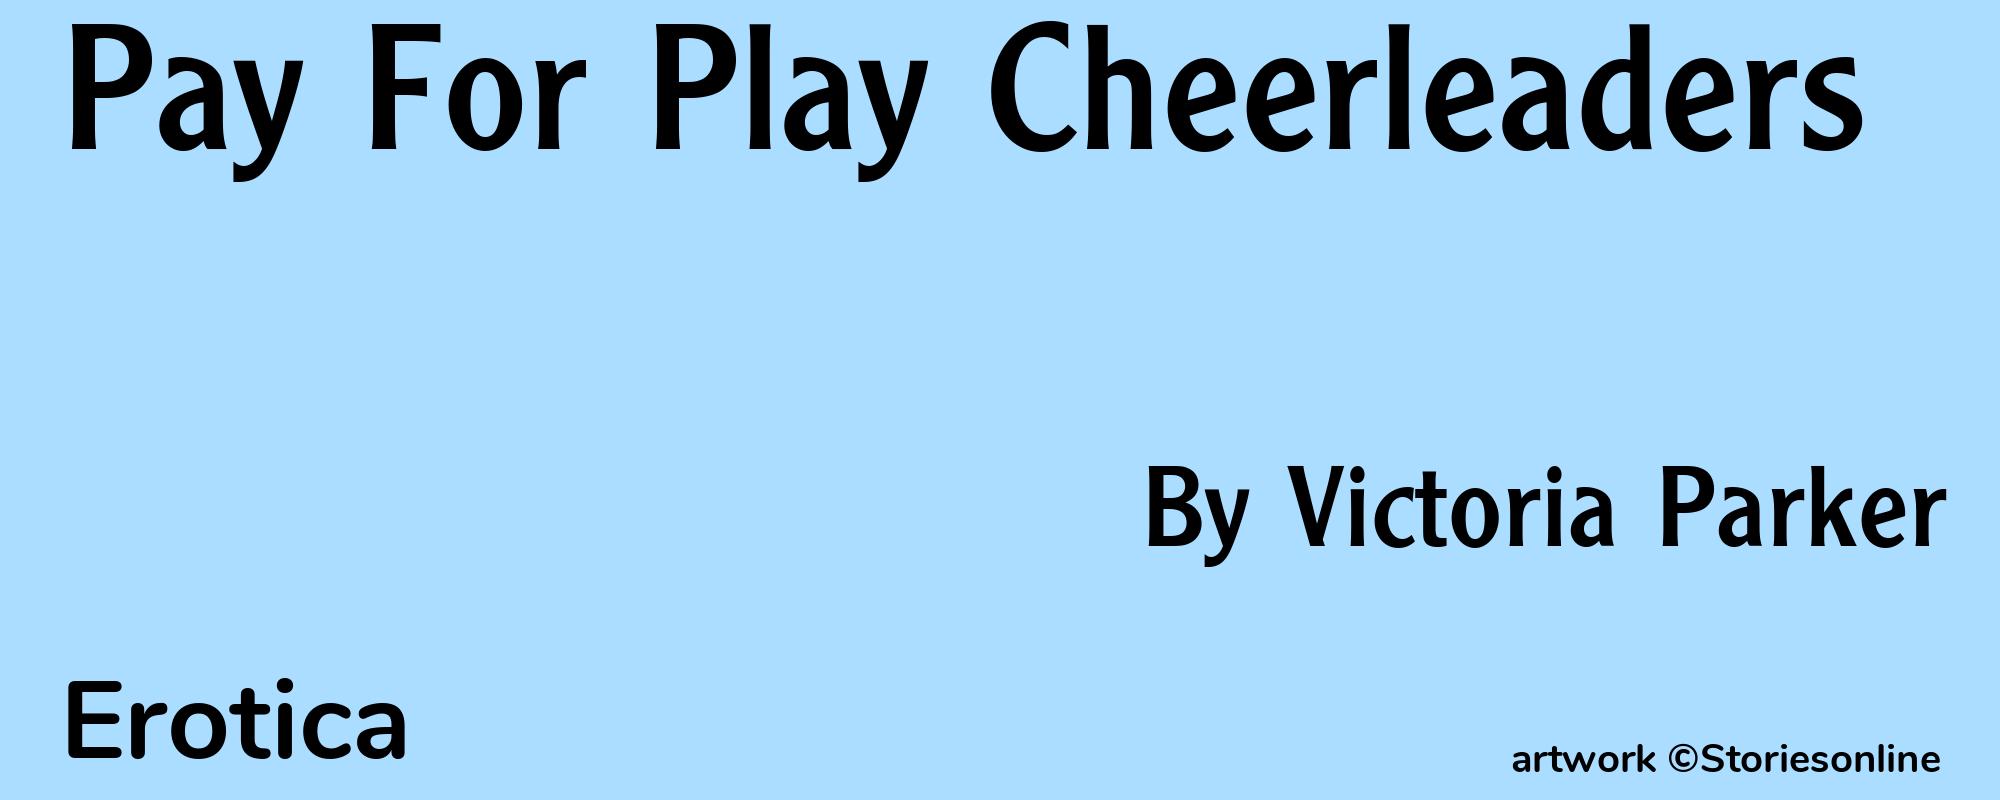 Pay For Play Cheerleaders - Cover